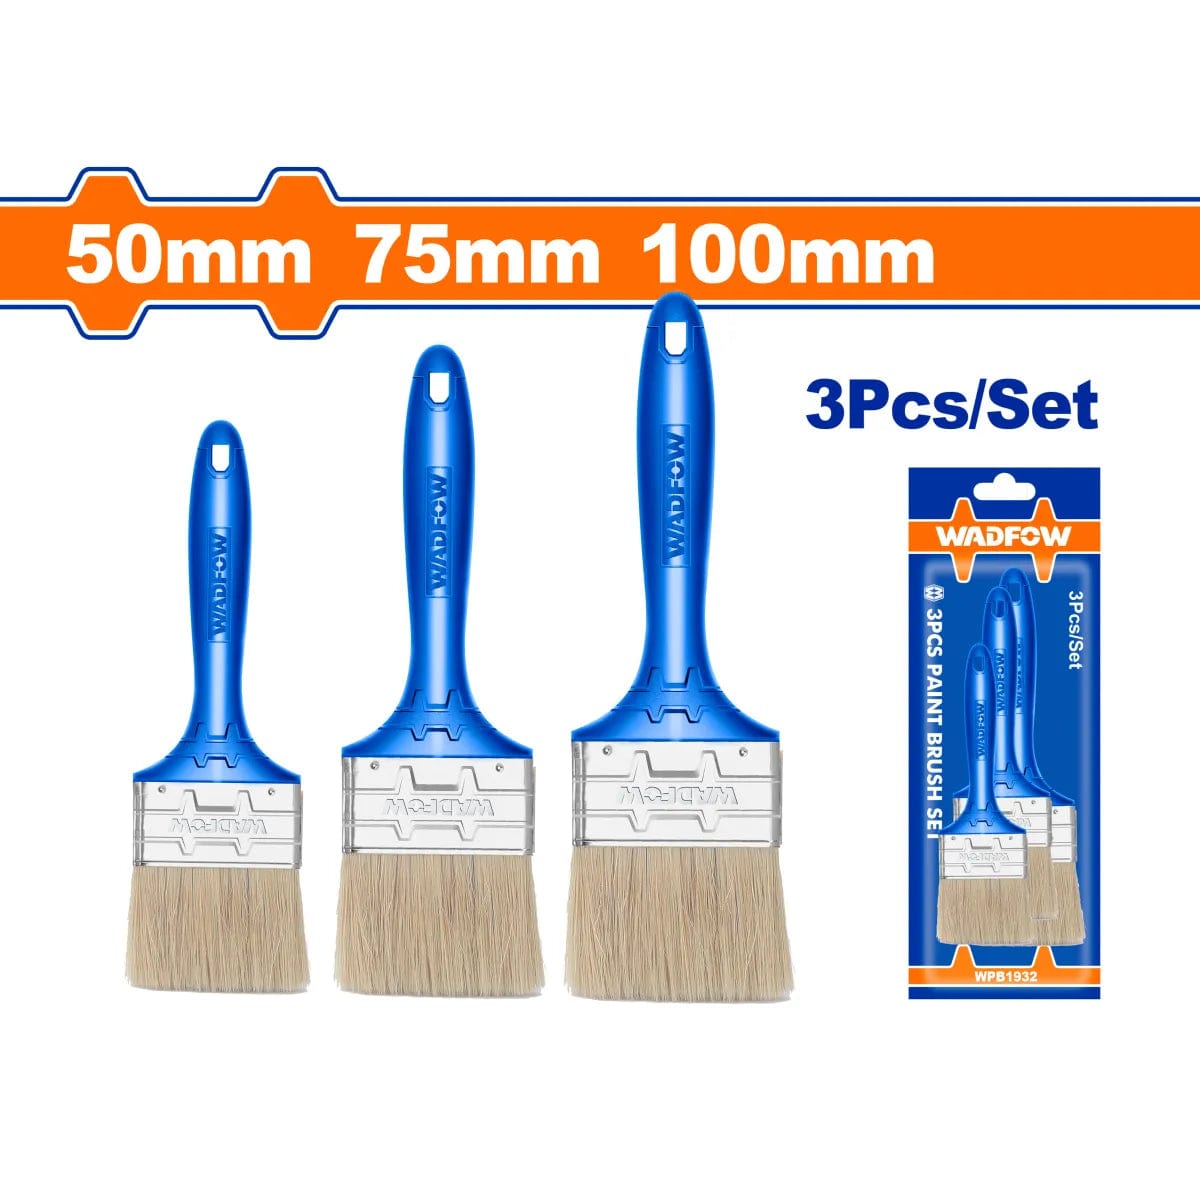 Buy Wadfow Oil-Based Paint Brushes Online in Accra, Ghana | Supply Master Paint Tools & Equipment Buy Tools hardware Building materials